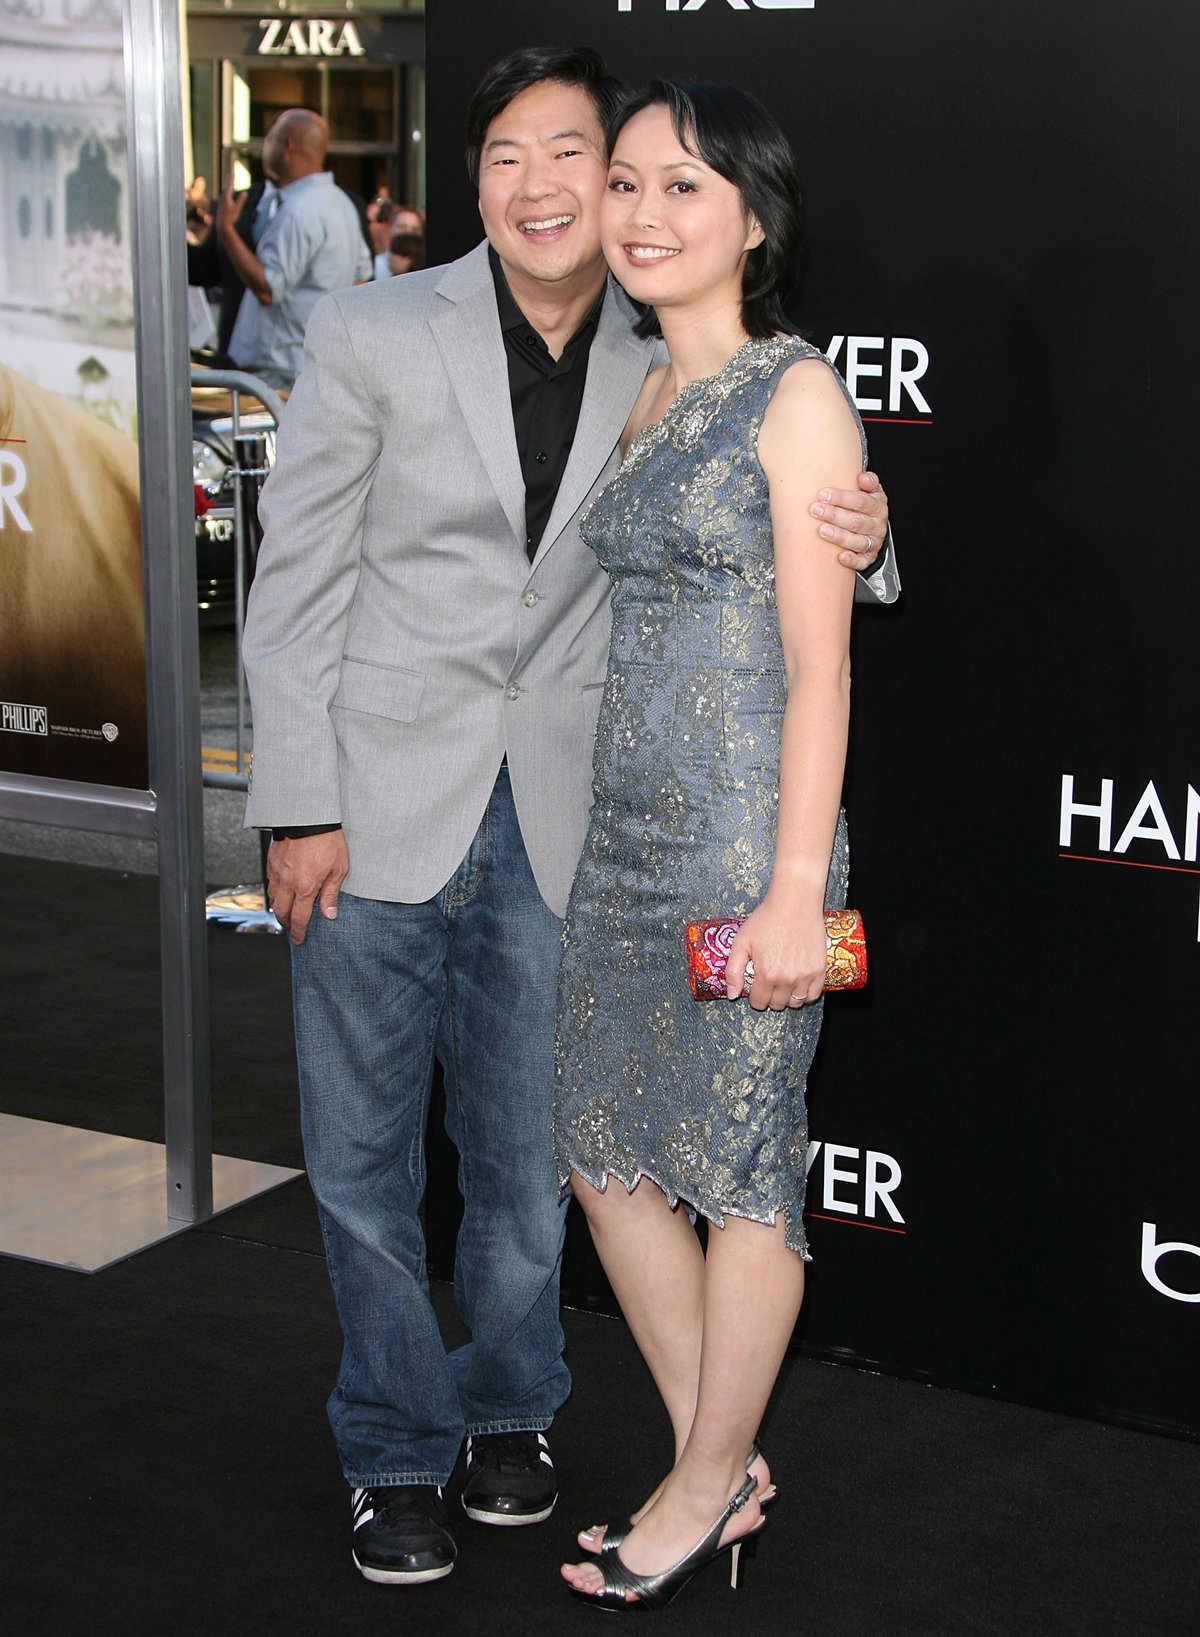 Actor Ken Jeong and his wife Tran Ho arrive at "The Hangover Part II" Los Angeles Premiere